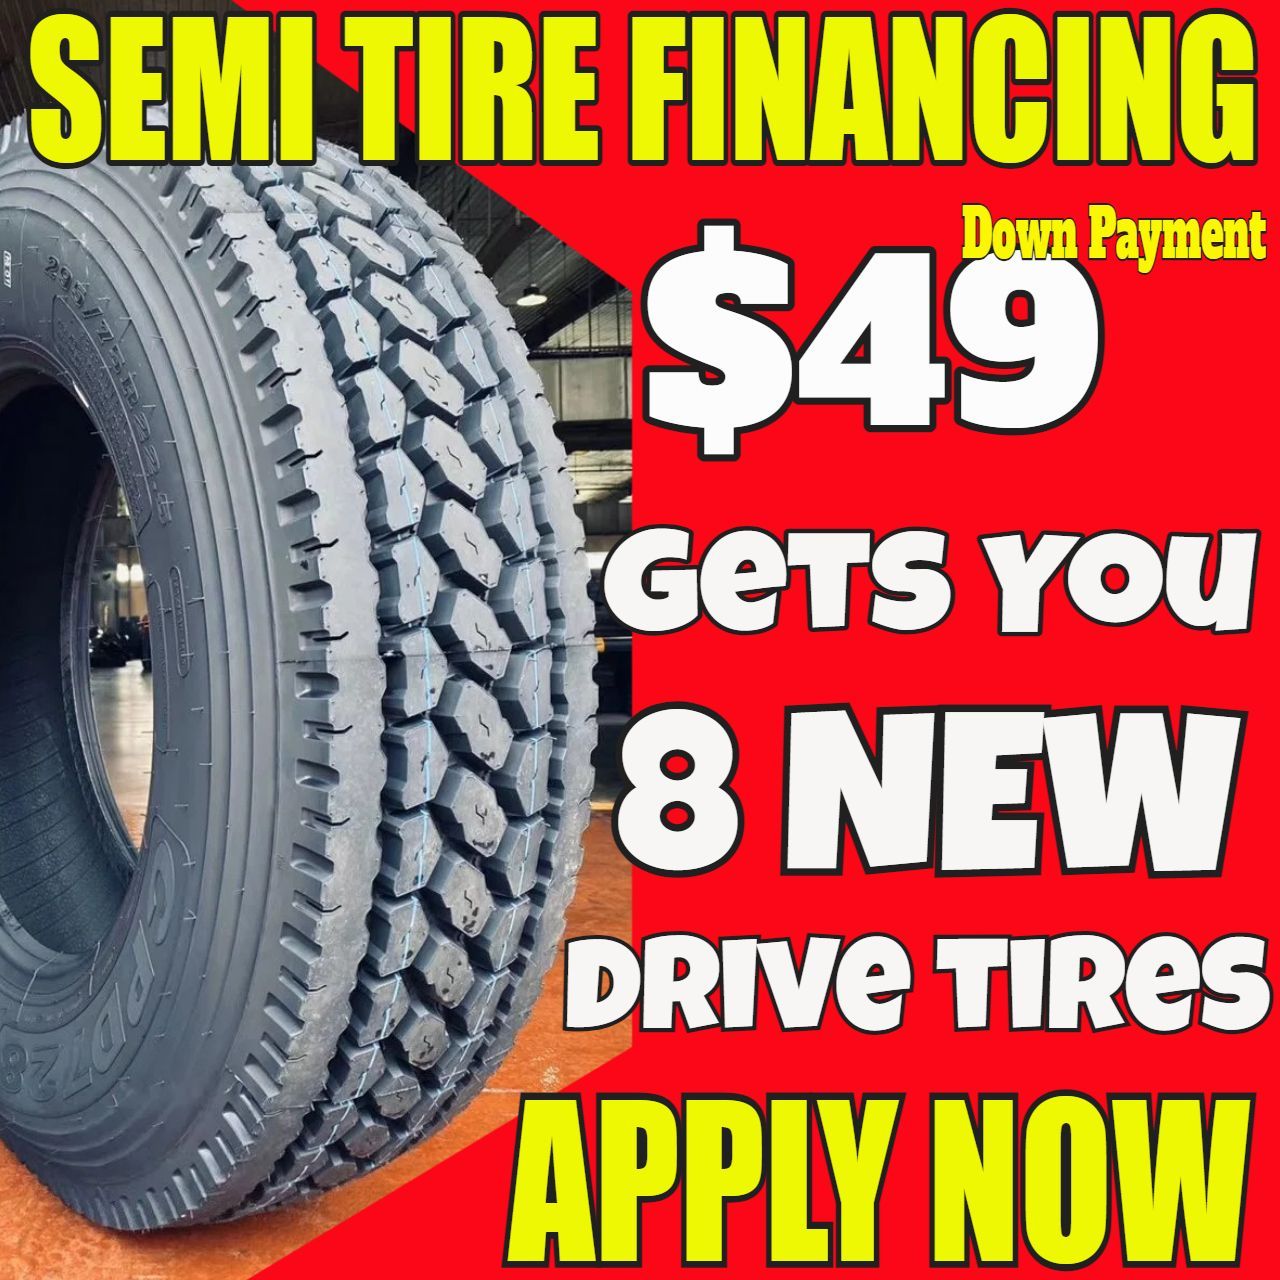 Commercial semi-truck tires Columbia, SC. 18-wheeler Heavy-duty Big-Rig trucking tires at Columbia, SC. Cheap tractor-trailer auto vehicle prices in Columbia, SC